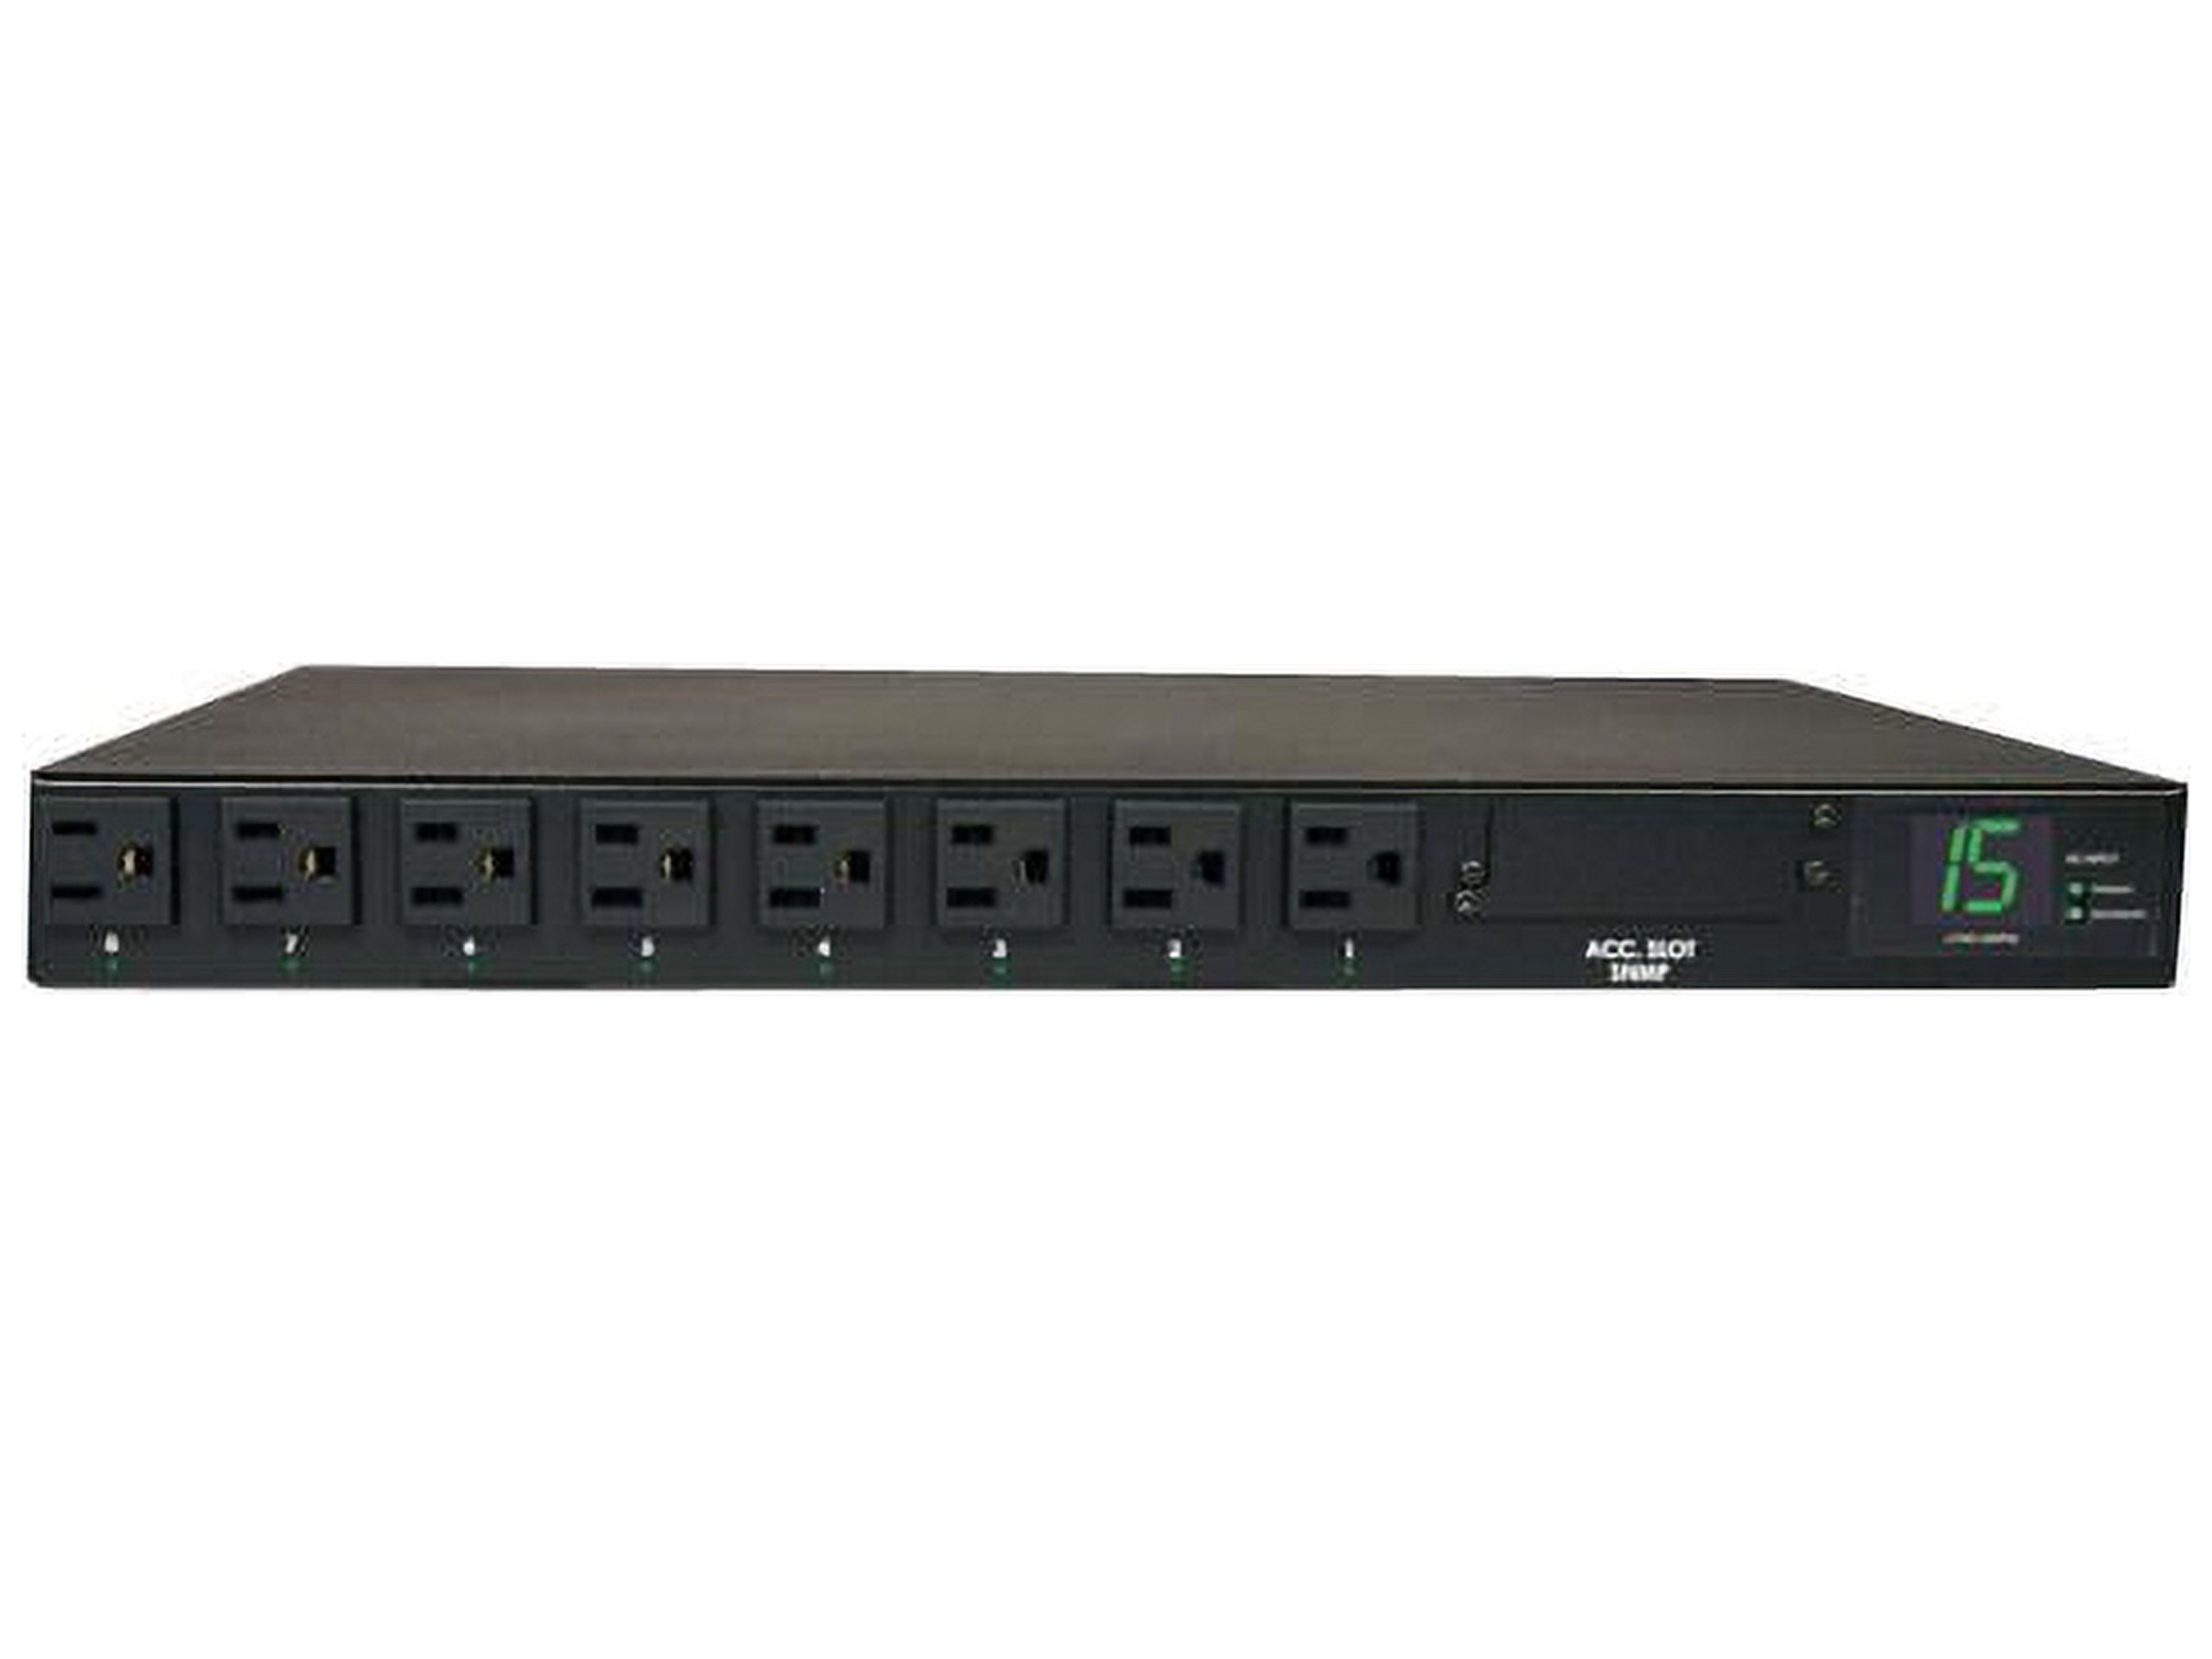 Tripp Lite Metered PDU with ATS, 15A, 8 Outlets (5-15R), 120V, 2 5-15P, 100 - 127 V Input, 2 12 ft. Cords, 1U Rack-Mount Power, TAA (PDUMH15AT) - image 1 of 3